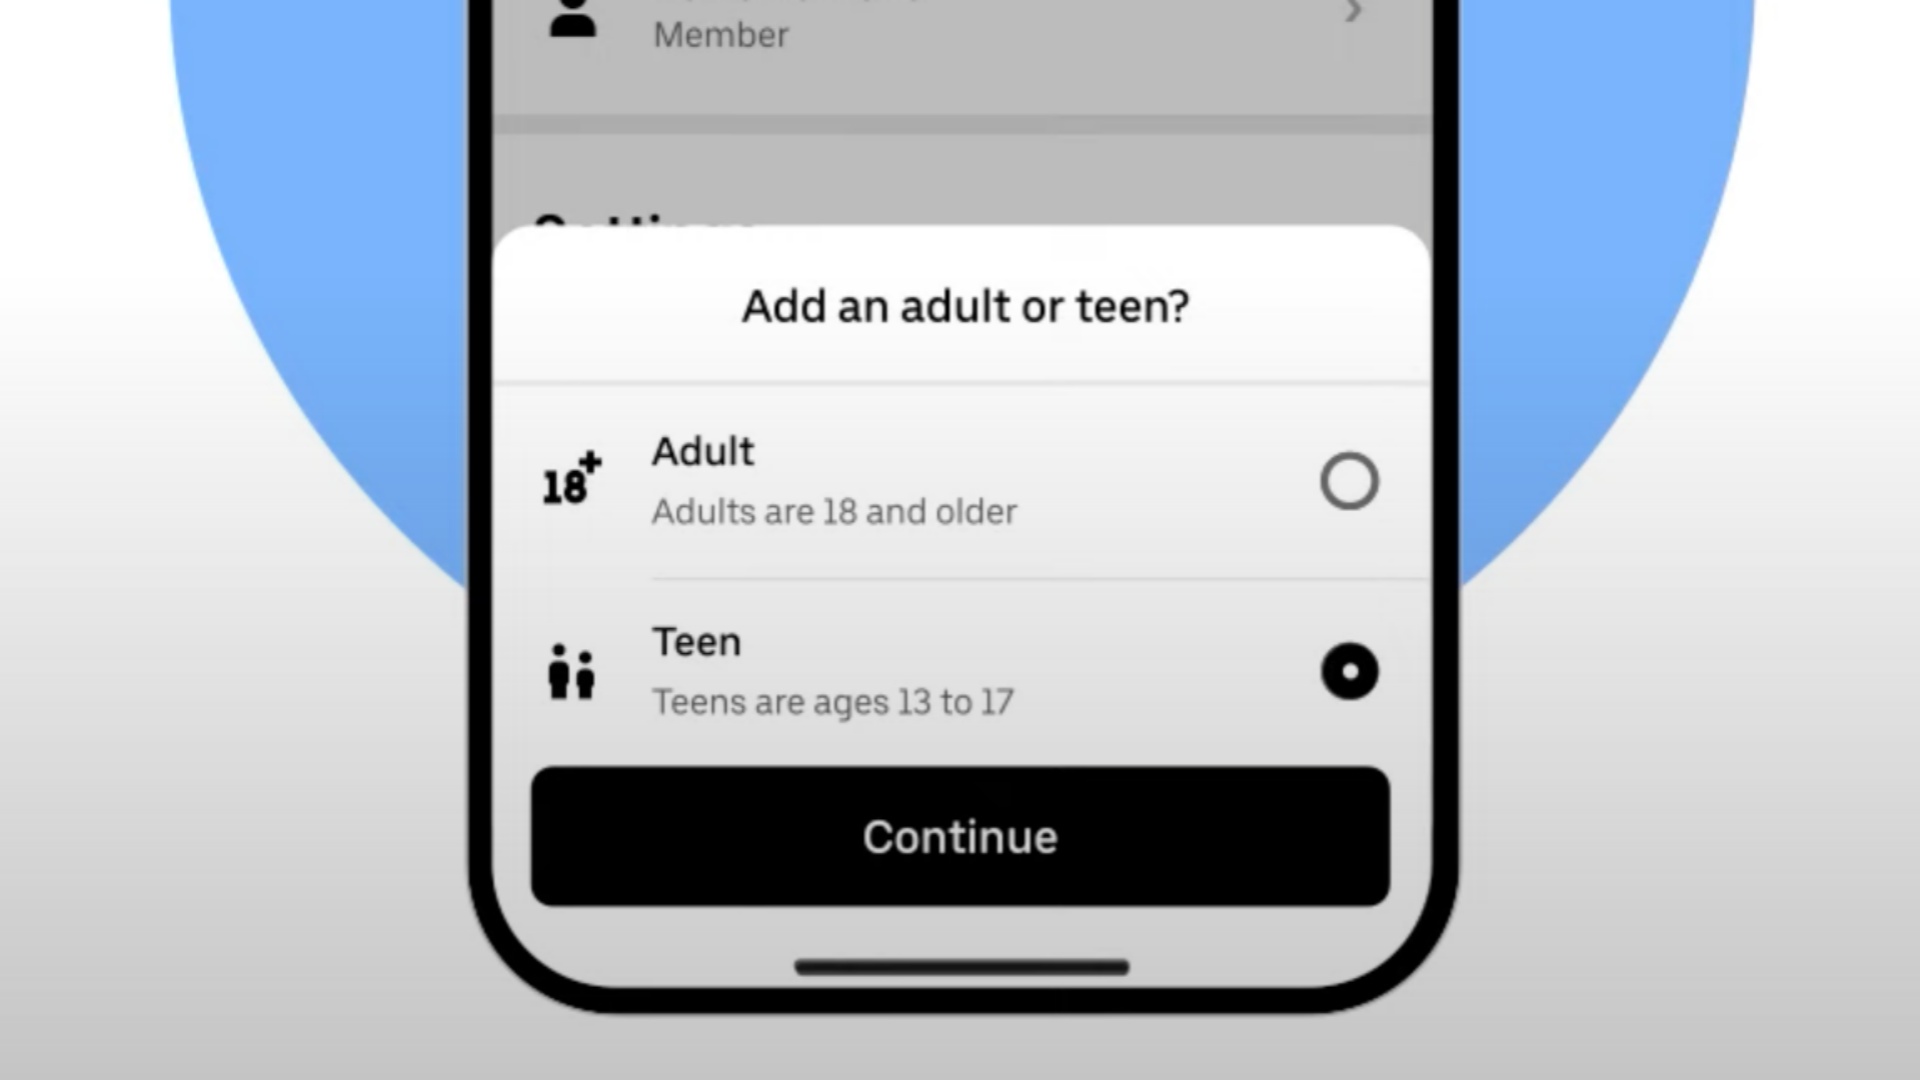 How to setup an Uber for teens account [Video]